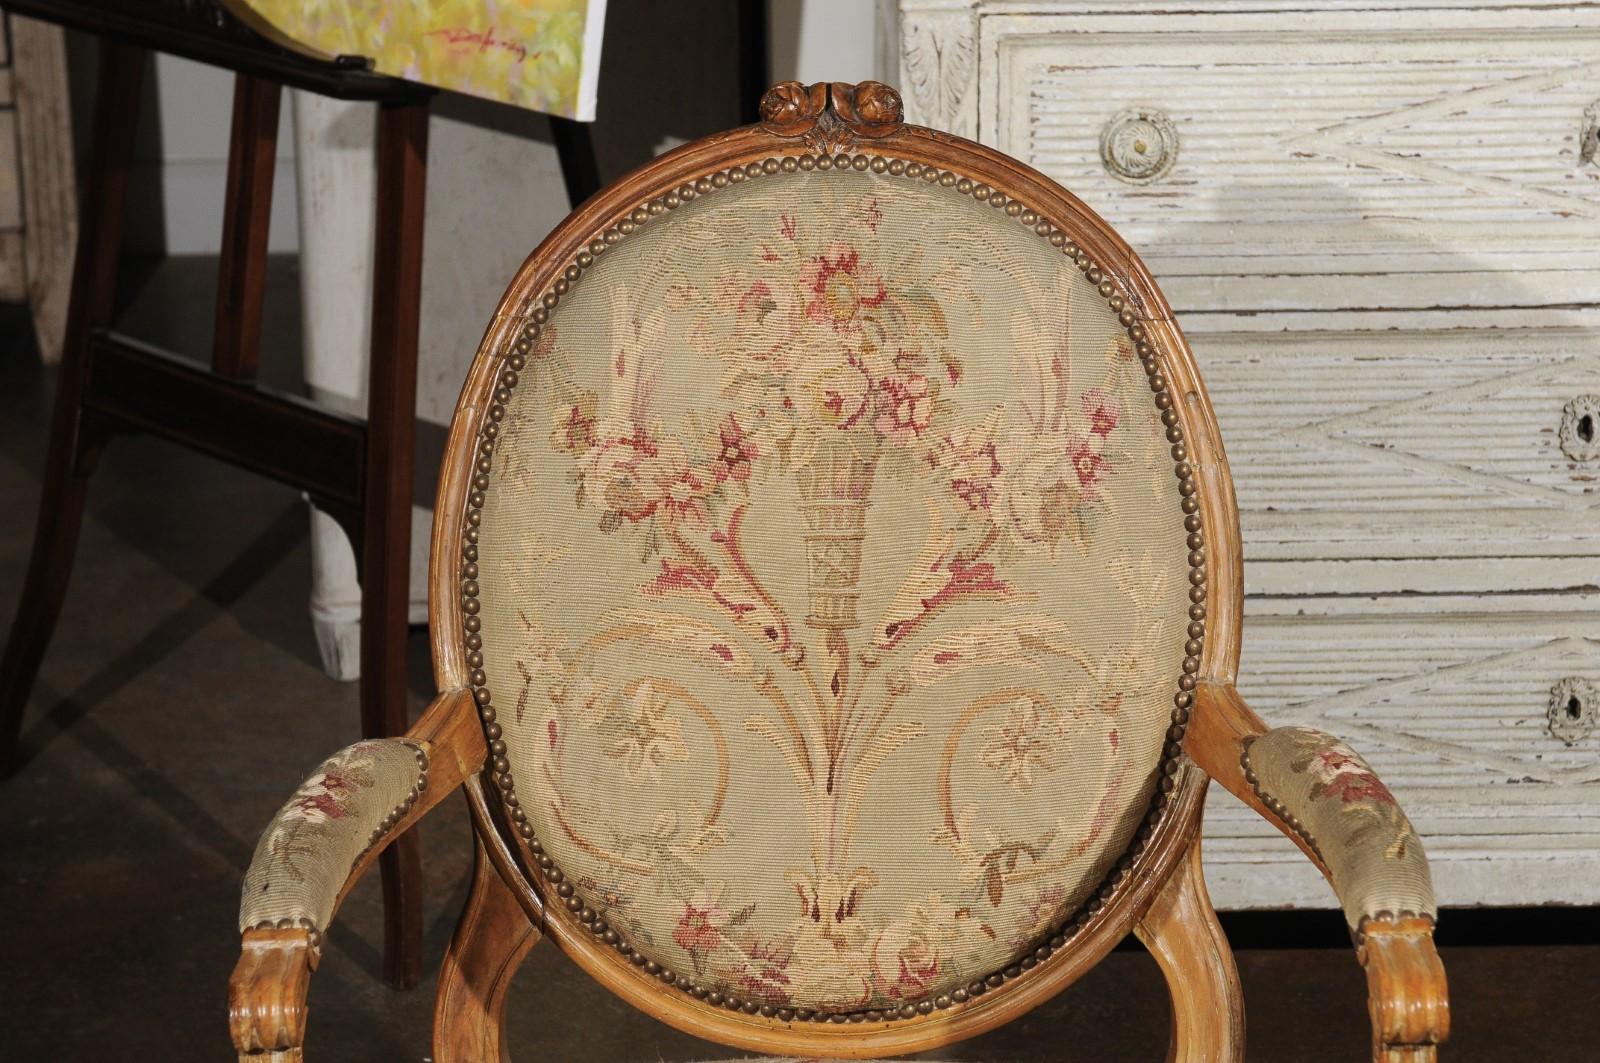 French Louis XVI Period 18th Century Armchair with Floral Tapestry Upholstery For Sale 1